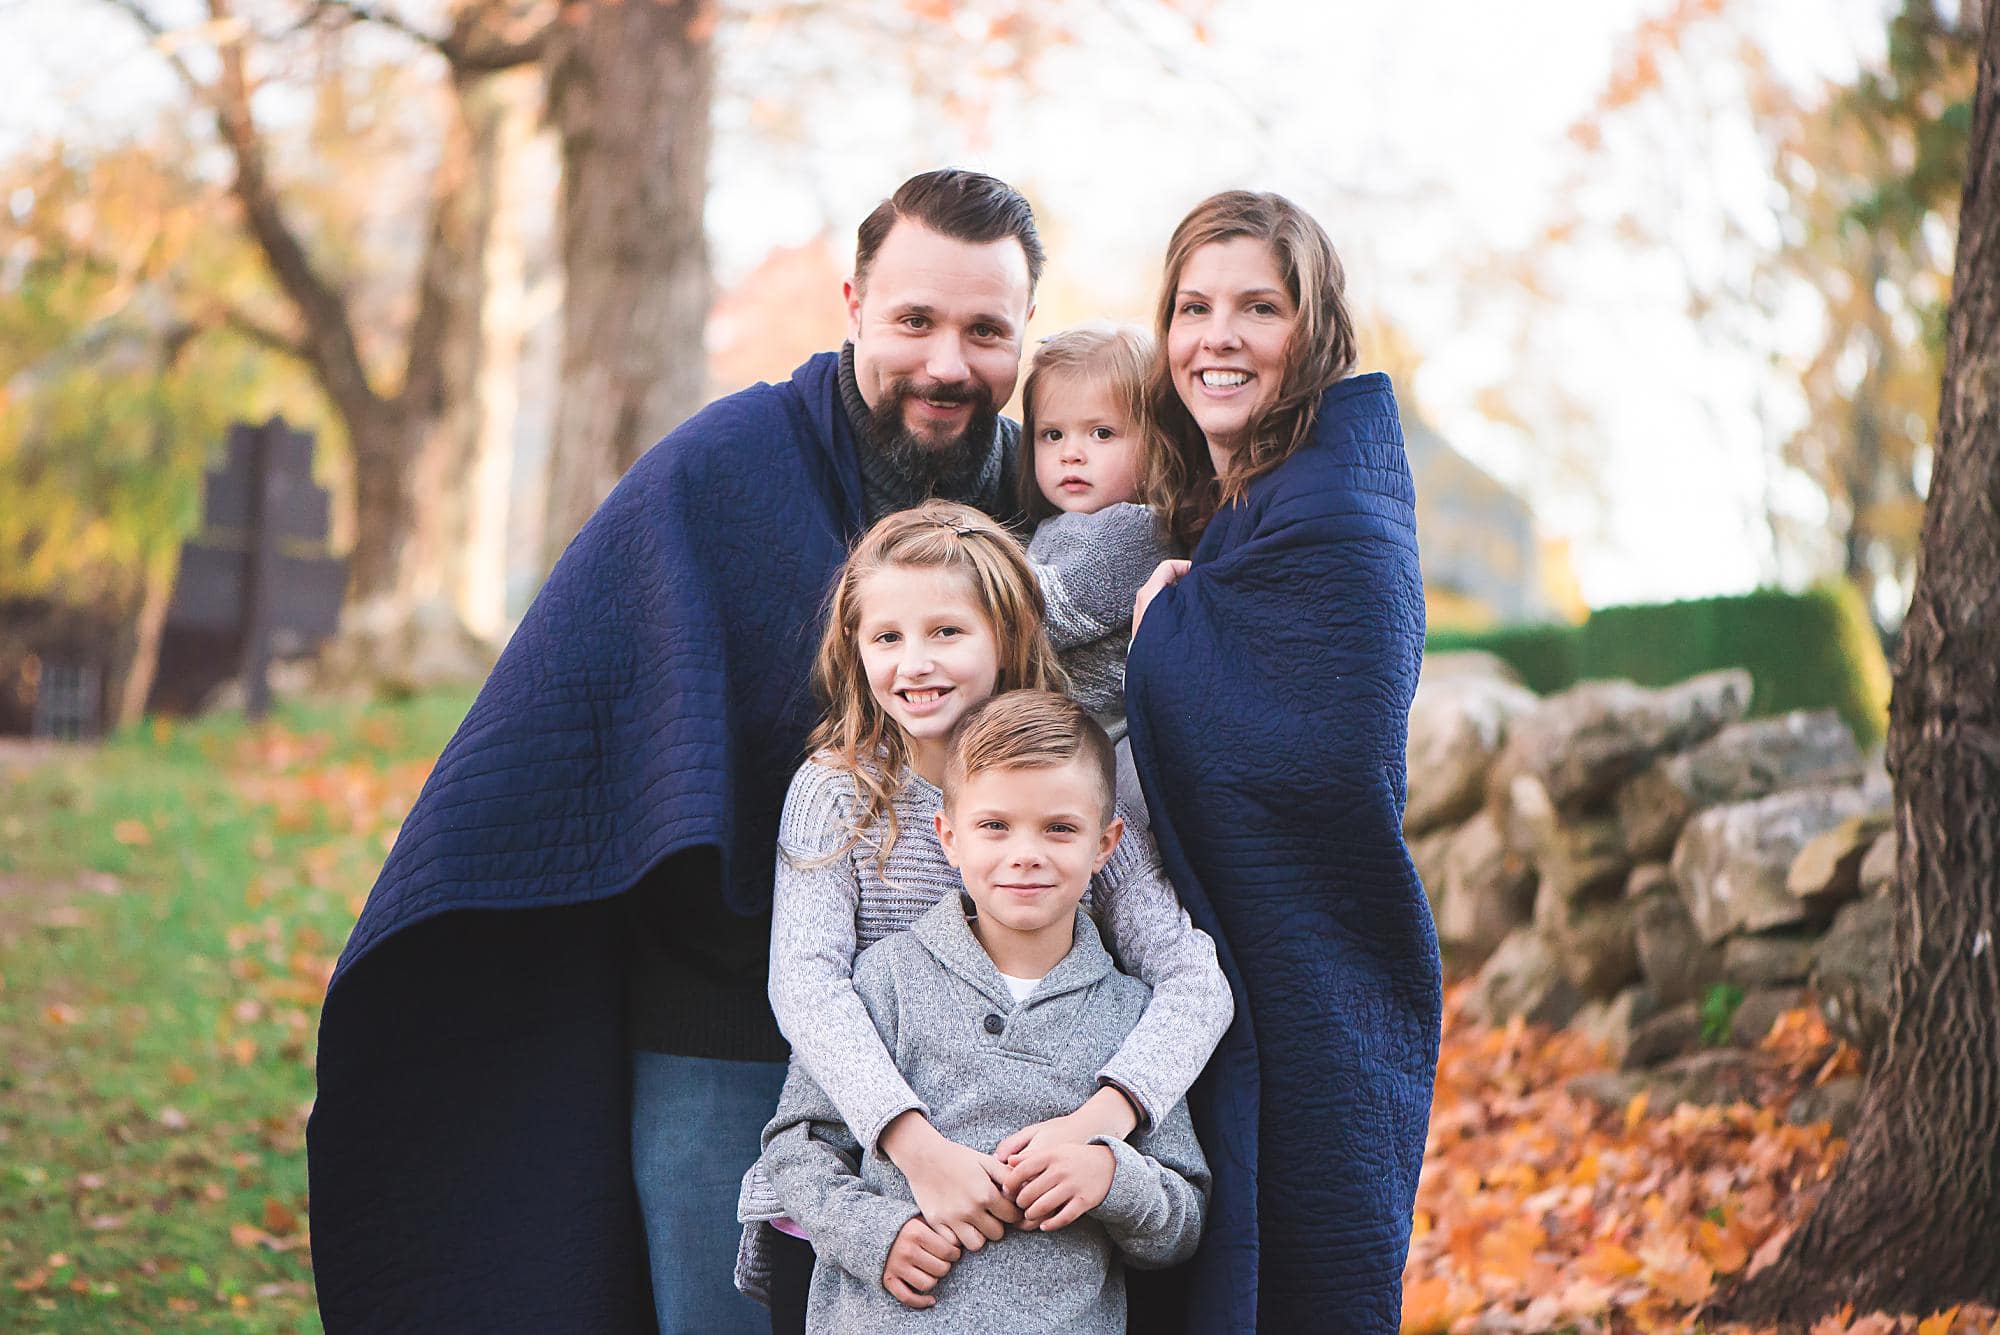 Family of 5 snuggling in blue blanket under Fall trees